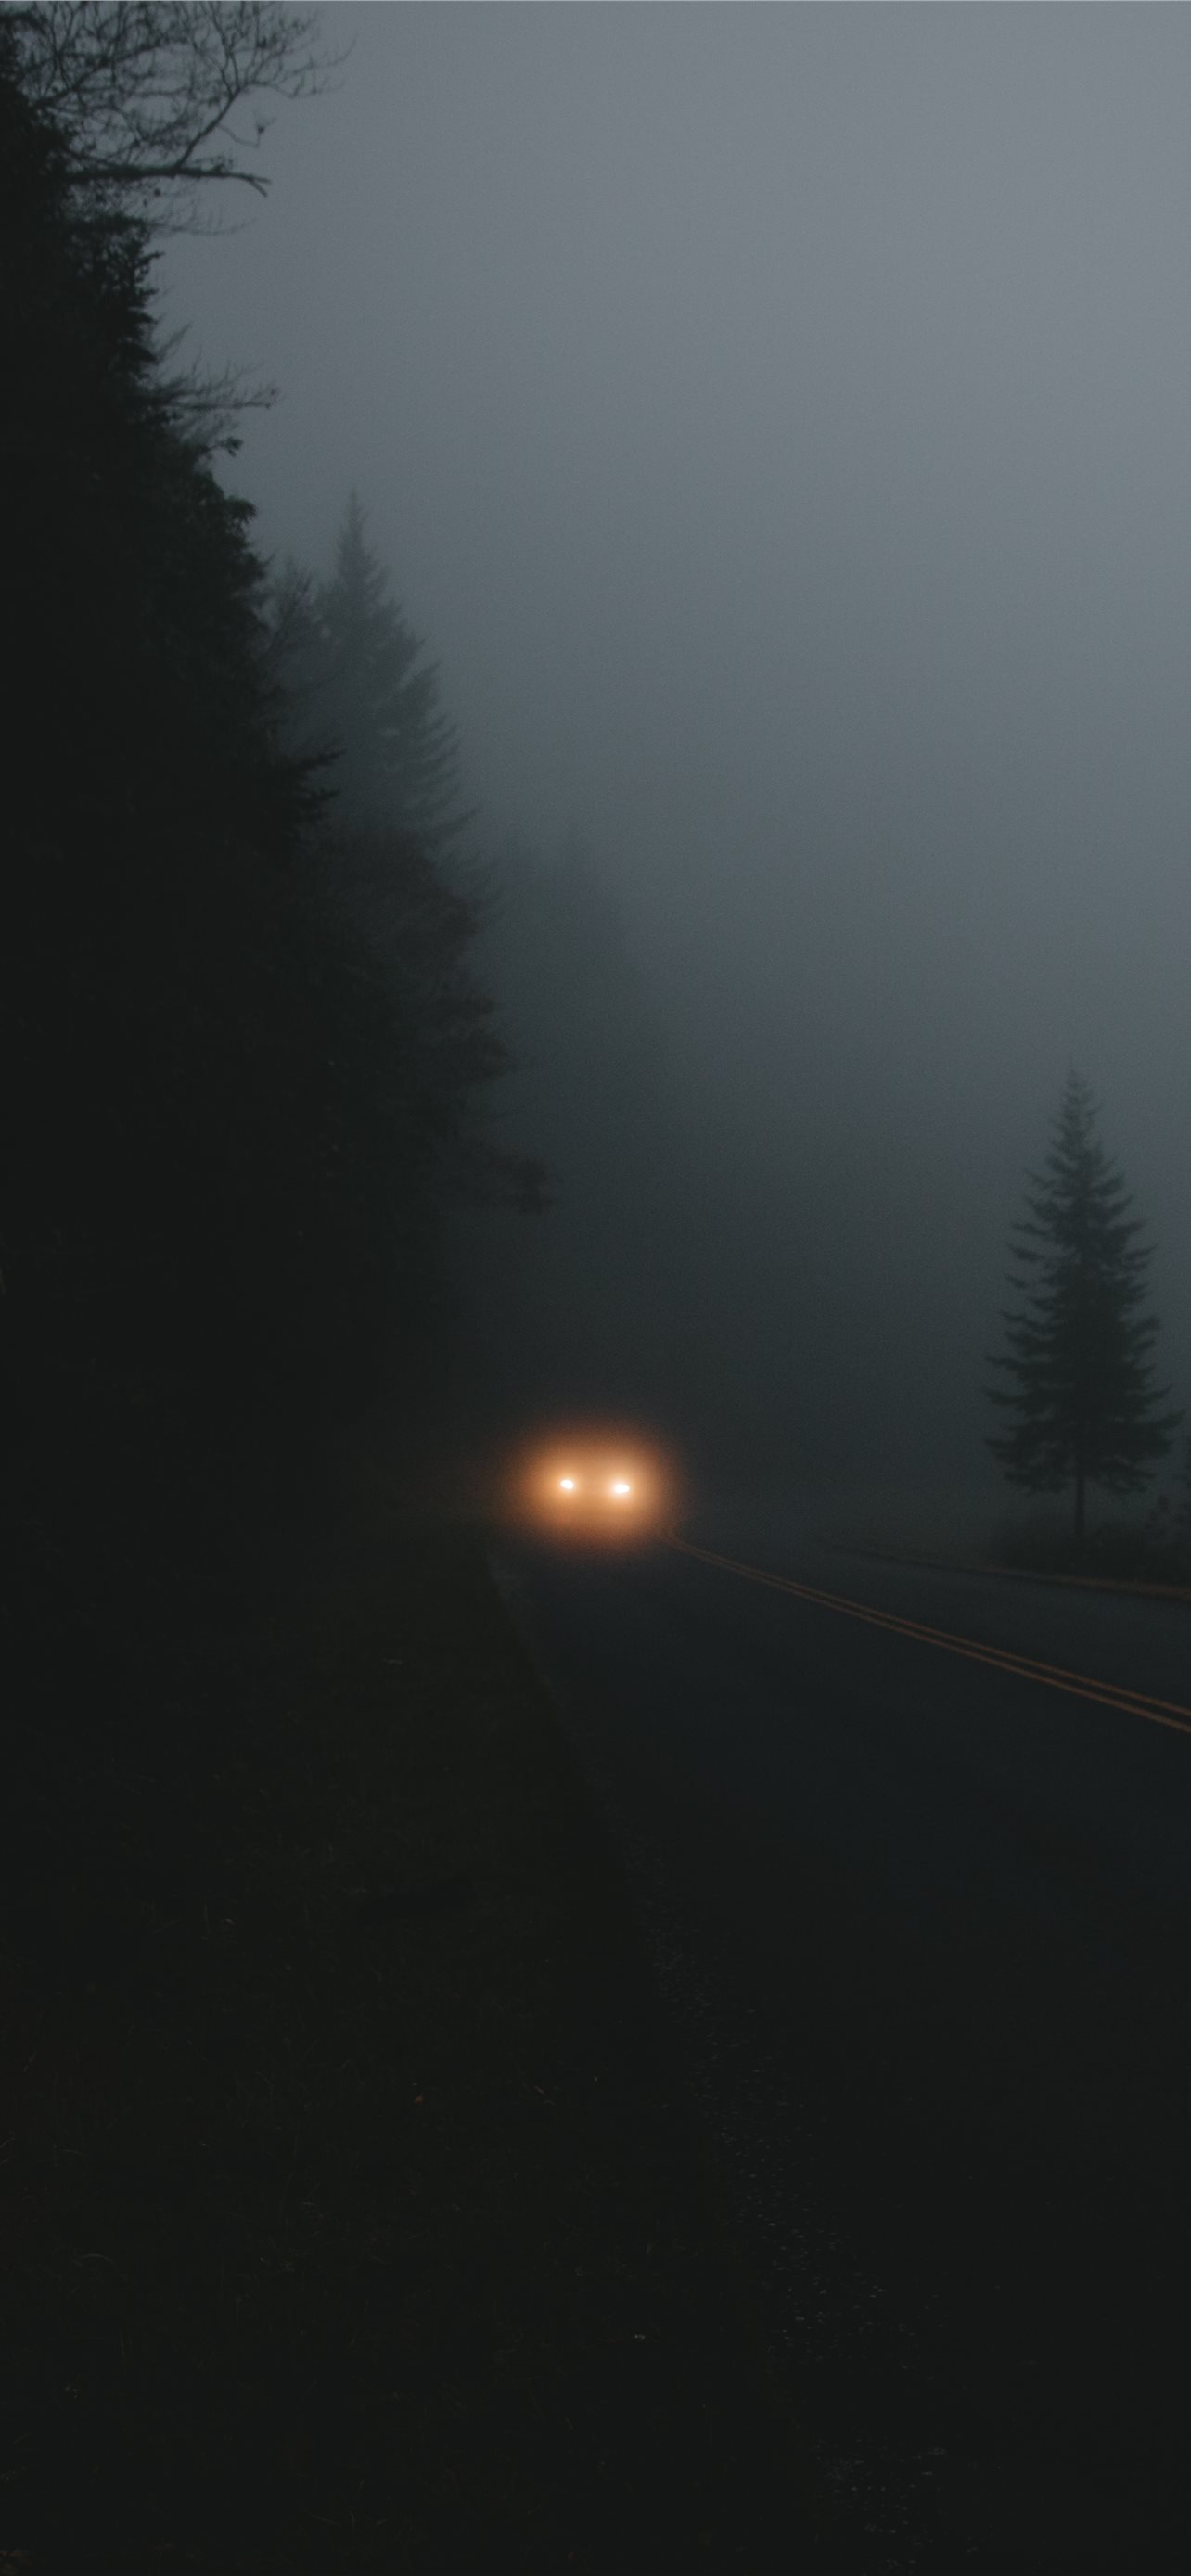 vehicle on road during nighttime iPhone wallpaper 